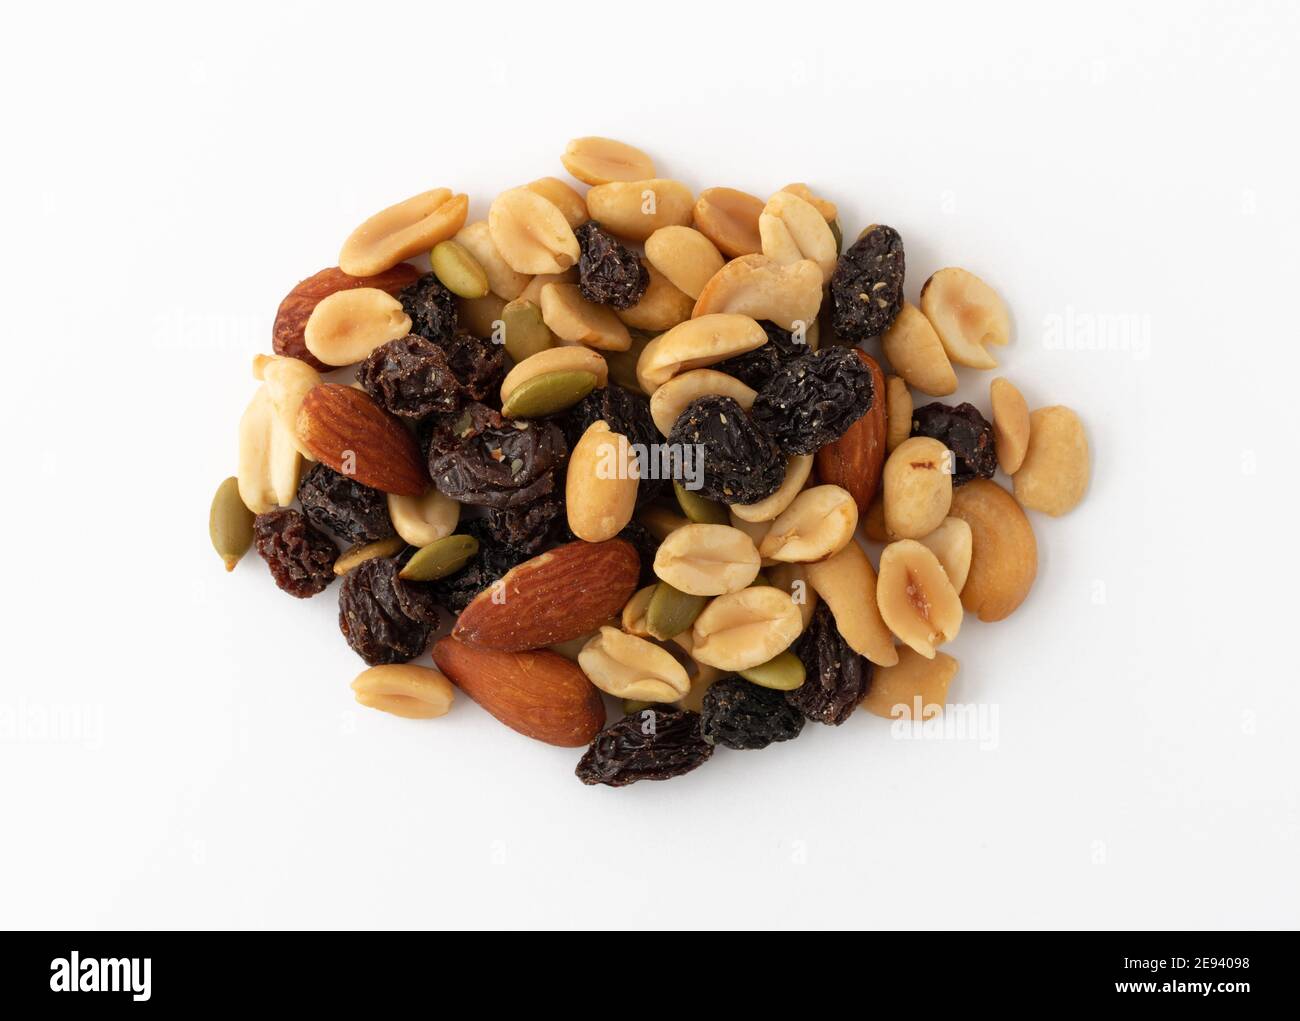 Top view of a serving of nuts and dried fruit on a white background. Stock Photo